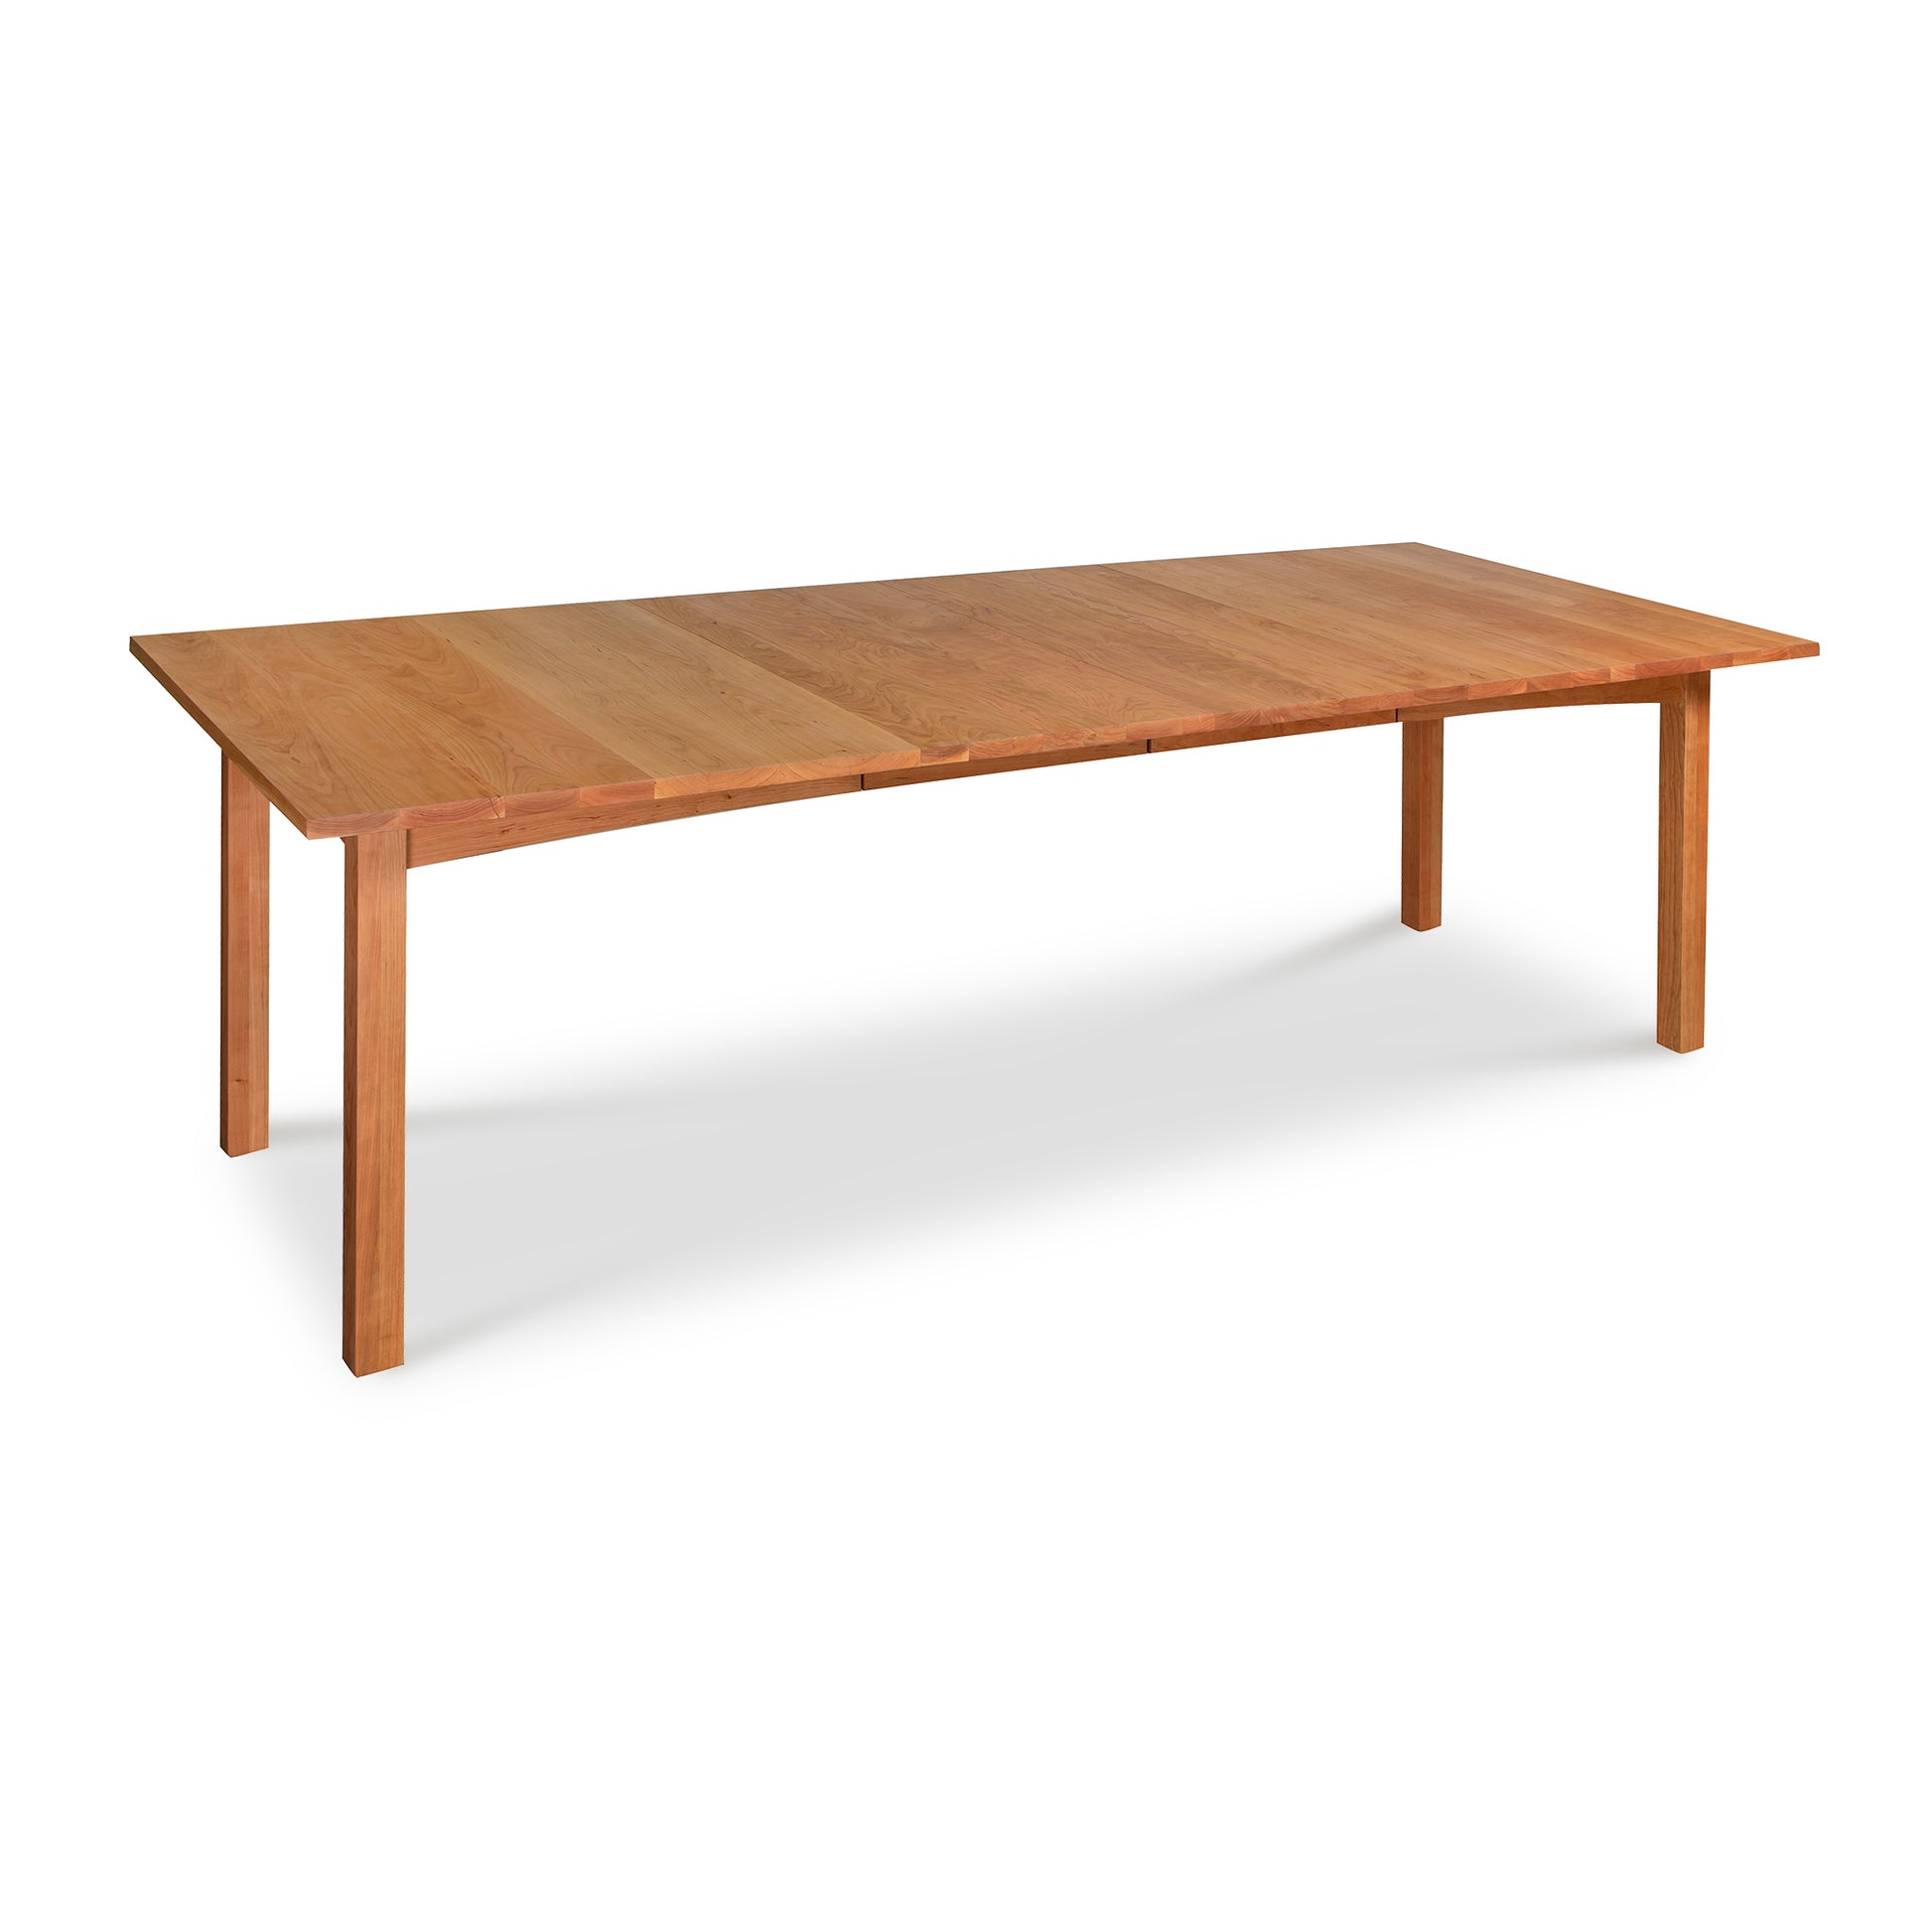 A long wooden Vermont Furniture Designs Burlington Shaker Extension dining table with a smooth finish and rectangular top, supported by four sturdy legs, isolated on a white background.